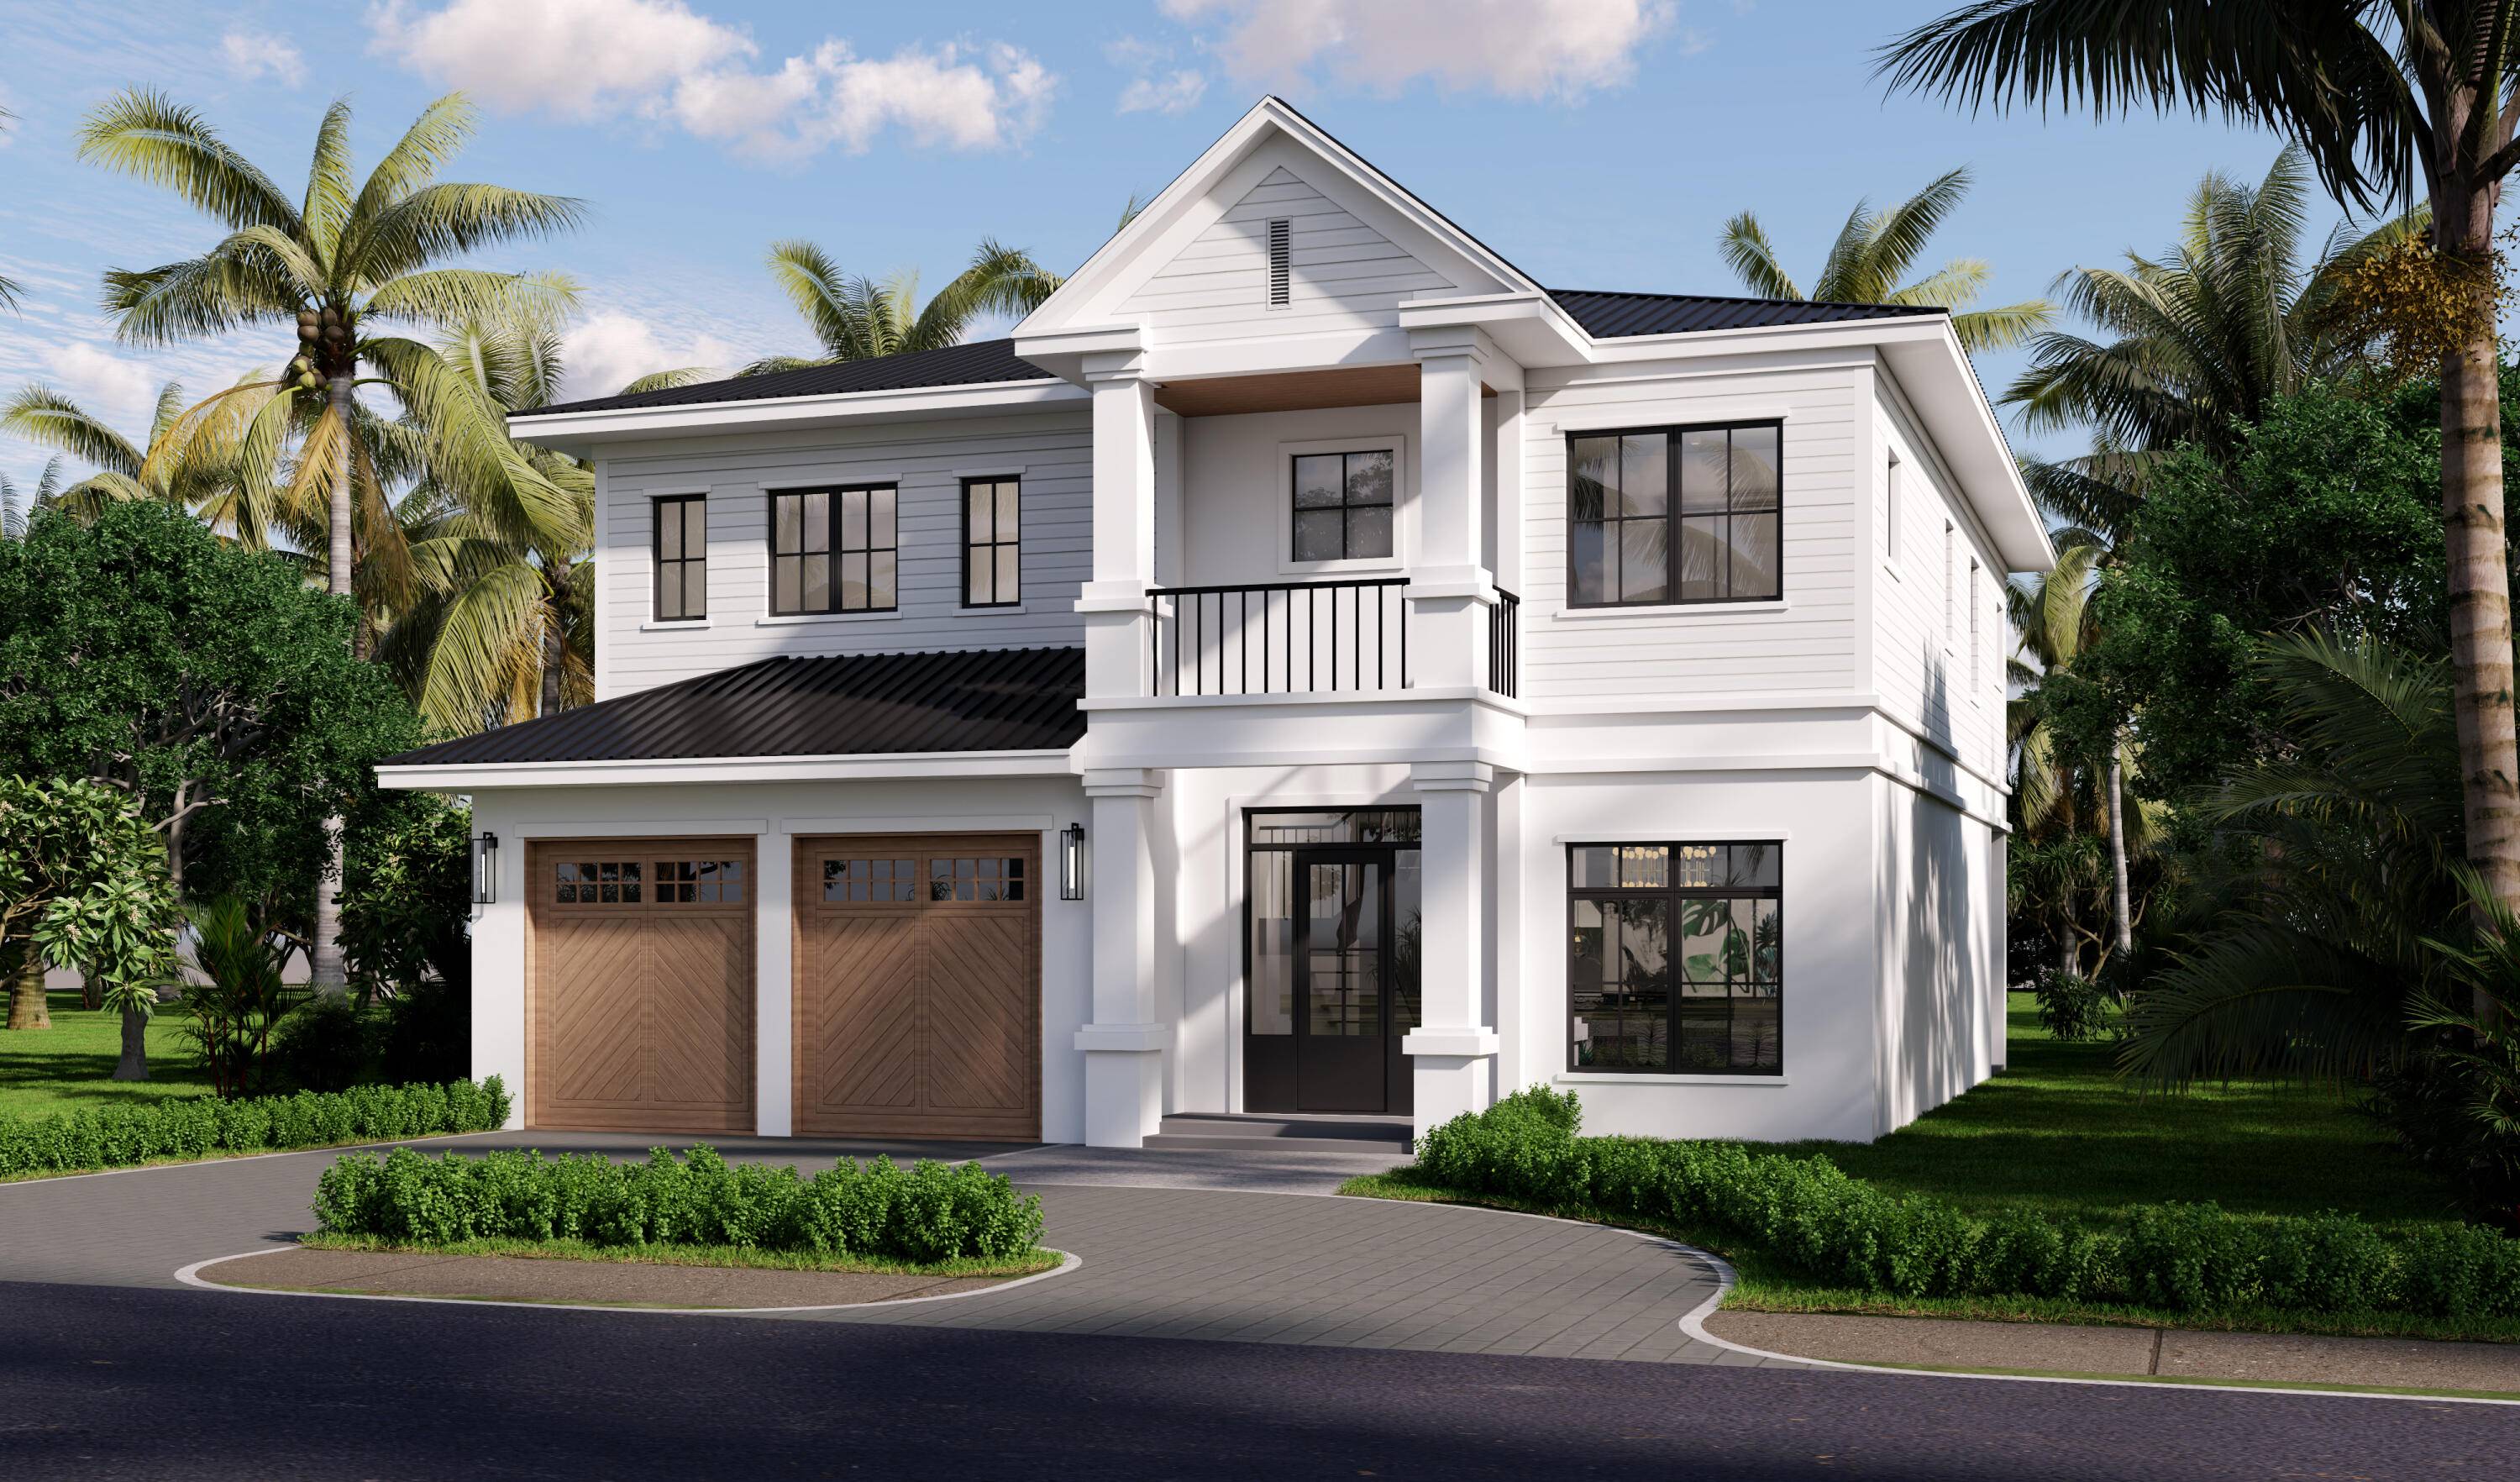 Introducing an opportunity for urban living in in the heart of Downtown Delray a brand new, meticulously crafted residence set to be completed in May 2024.